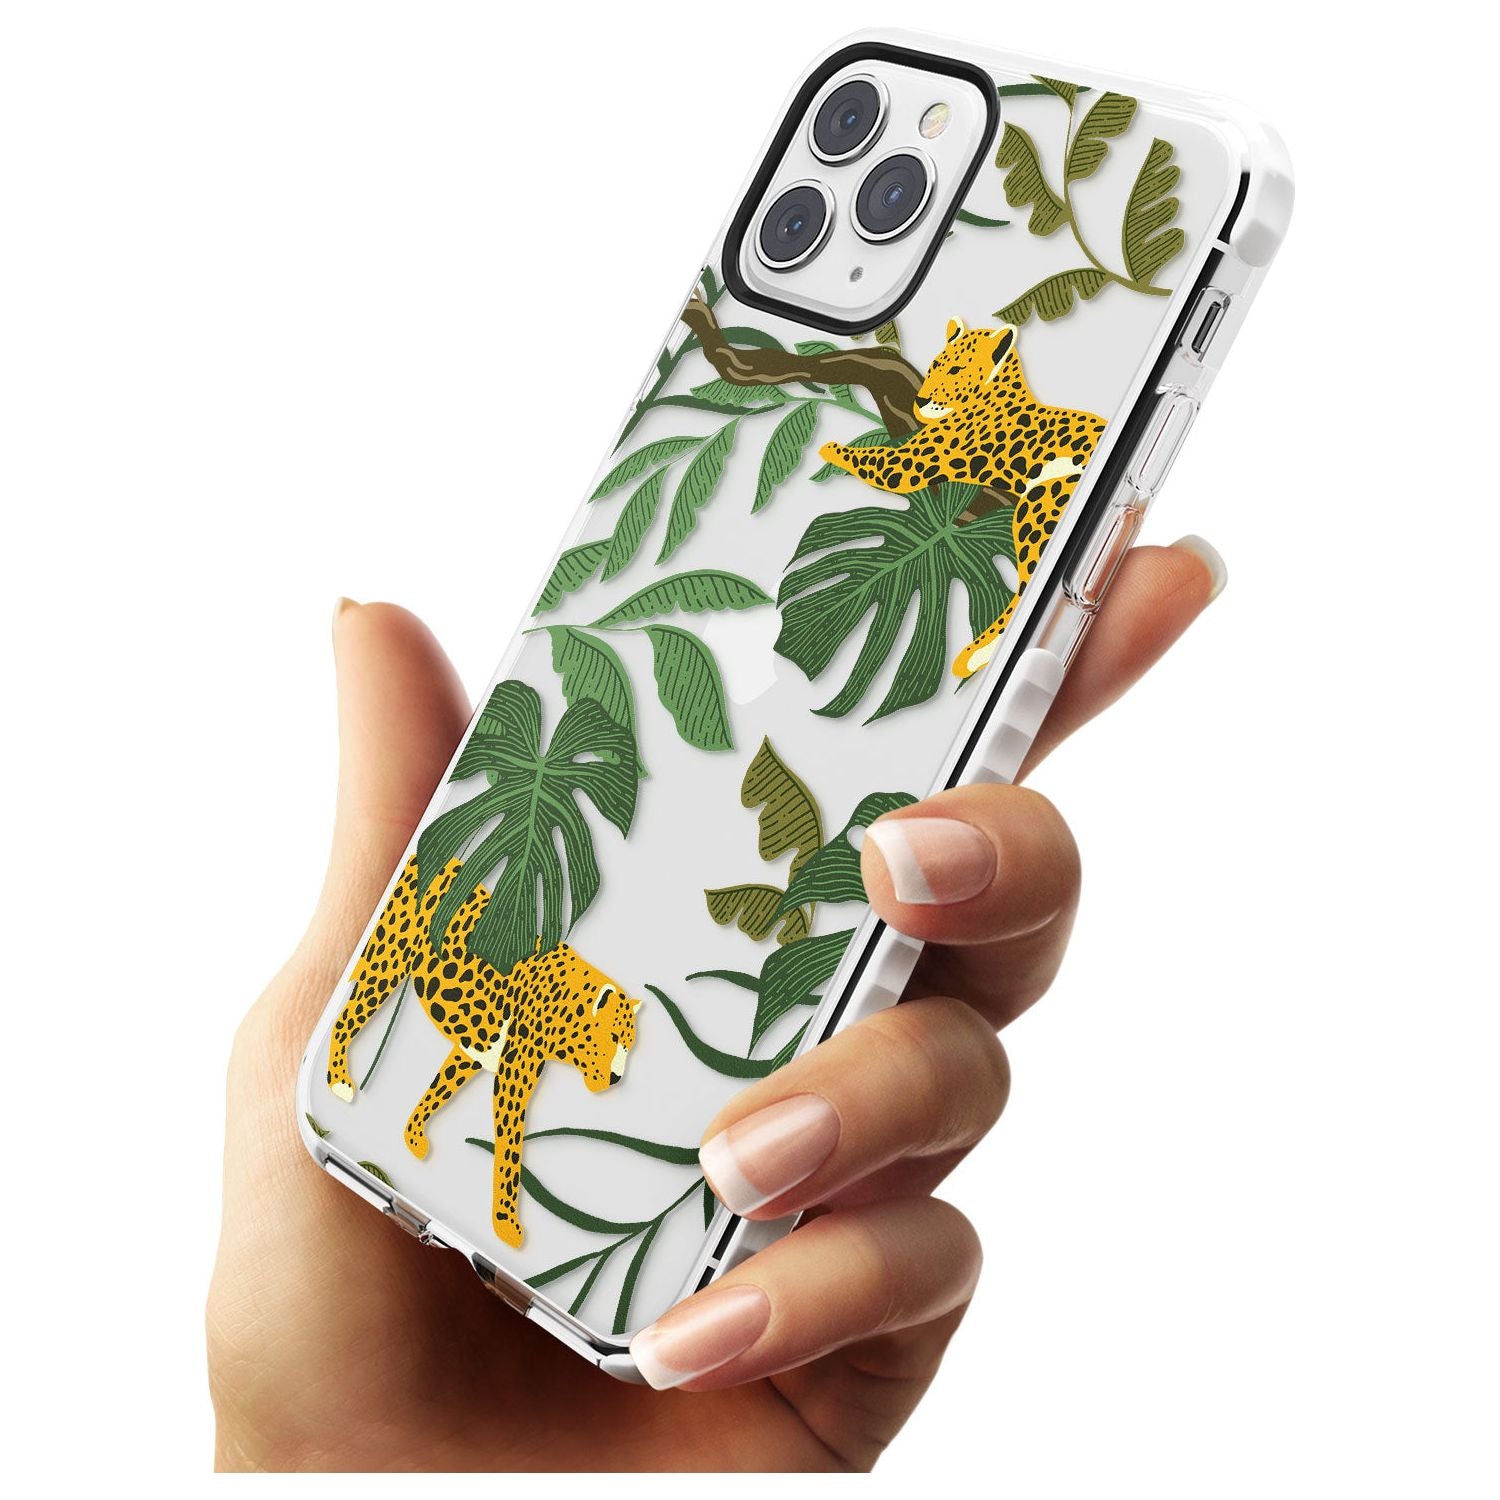 Two Jaguars & Foliage Jungle Cat Pattern Impact Phone Case for iPhone 11 Pro Max